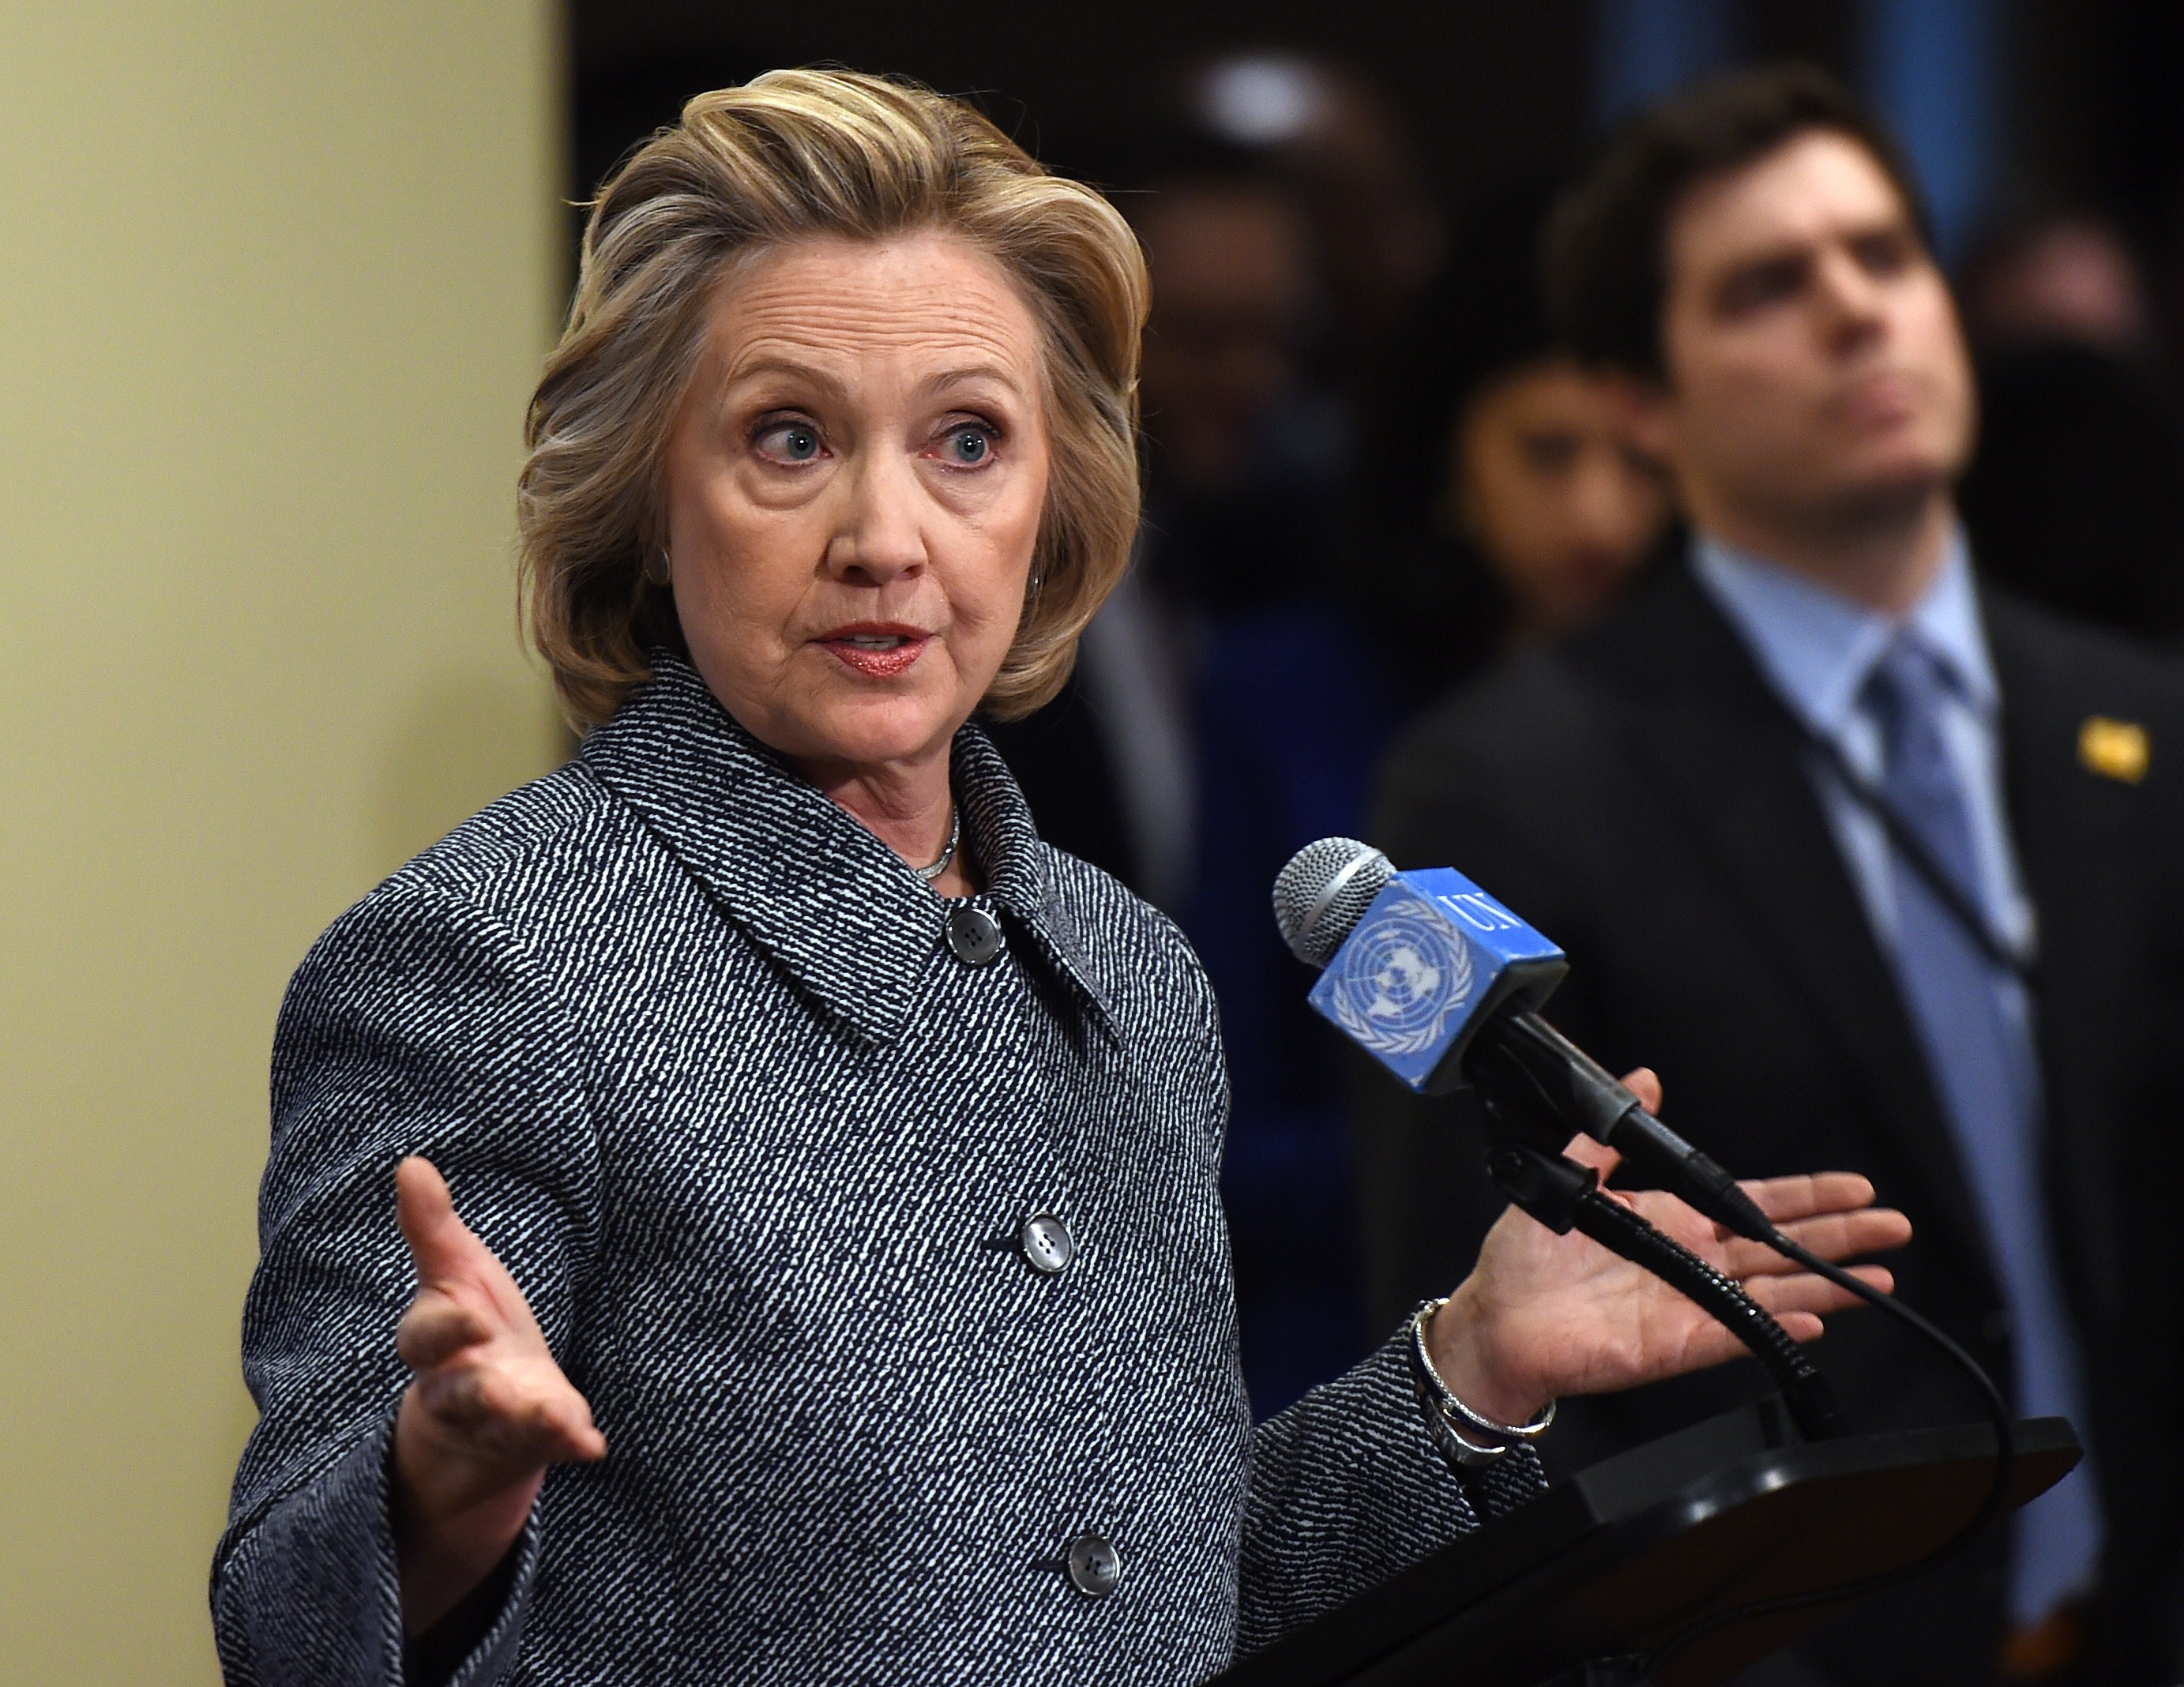 Hillary Clinton. (Don Emmert/AFP/Getty Images)